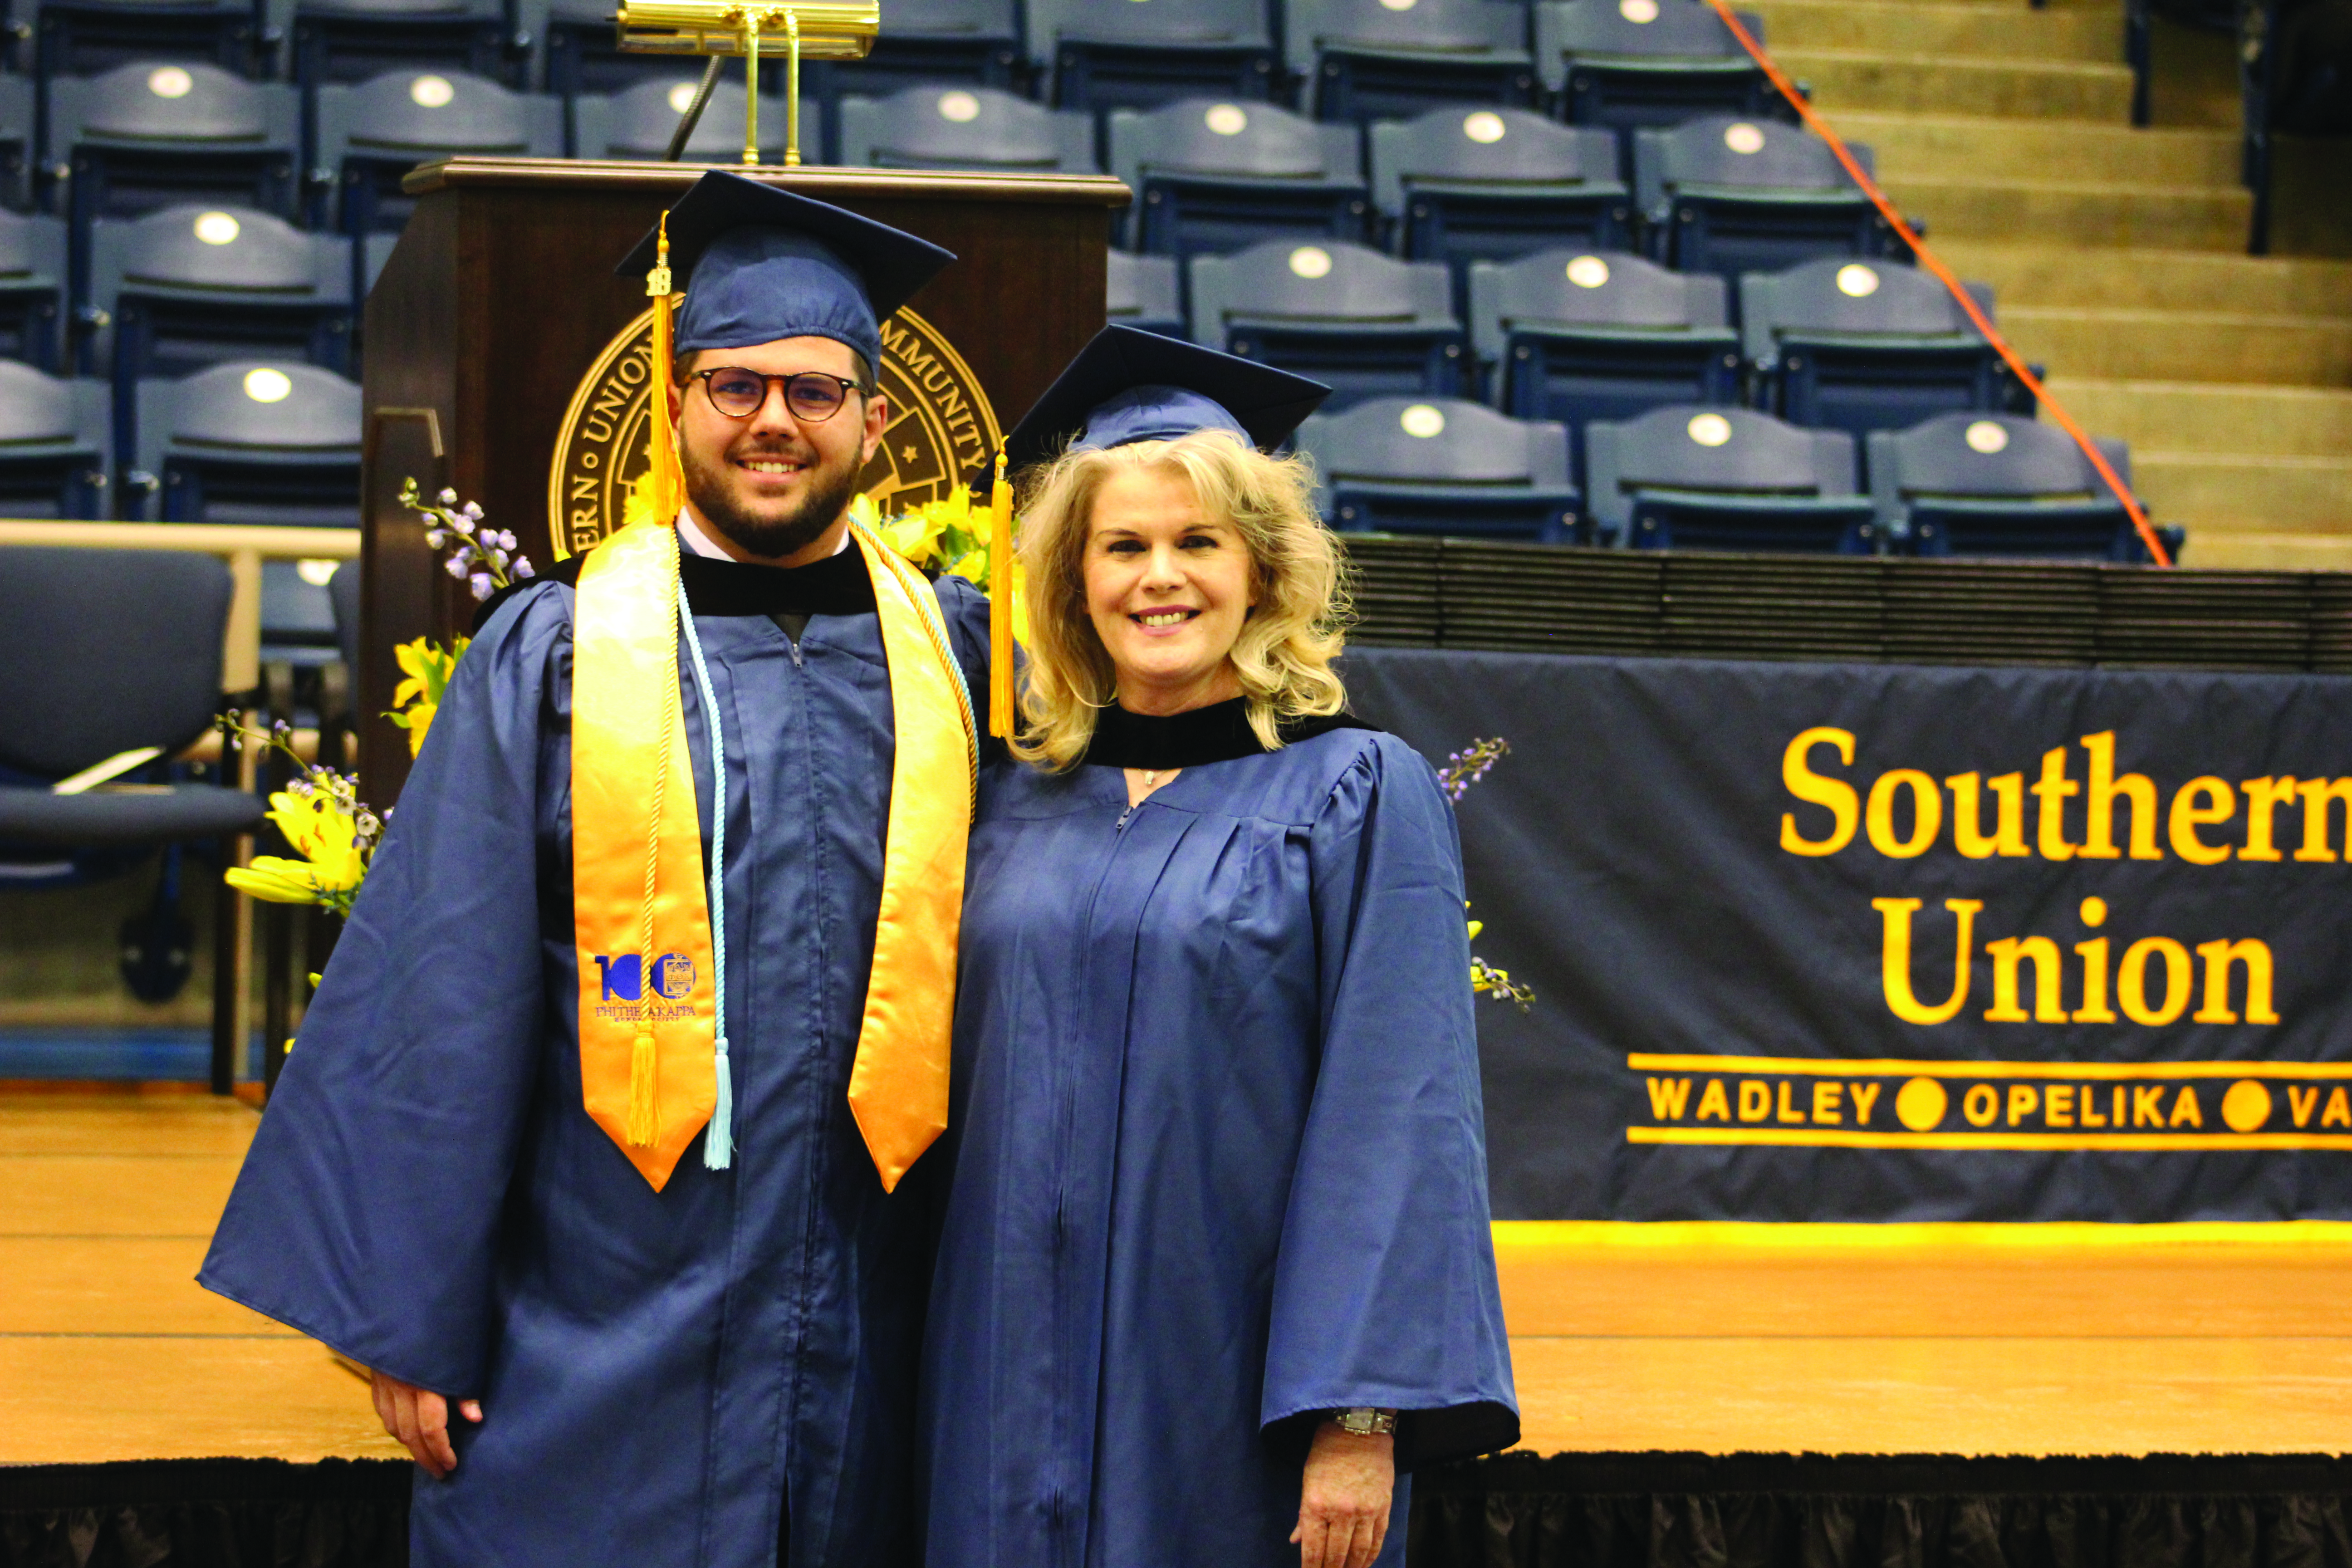 Southern Union’s commencement full of special moments, memories